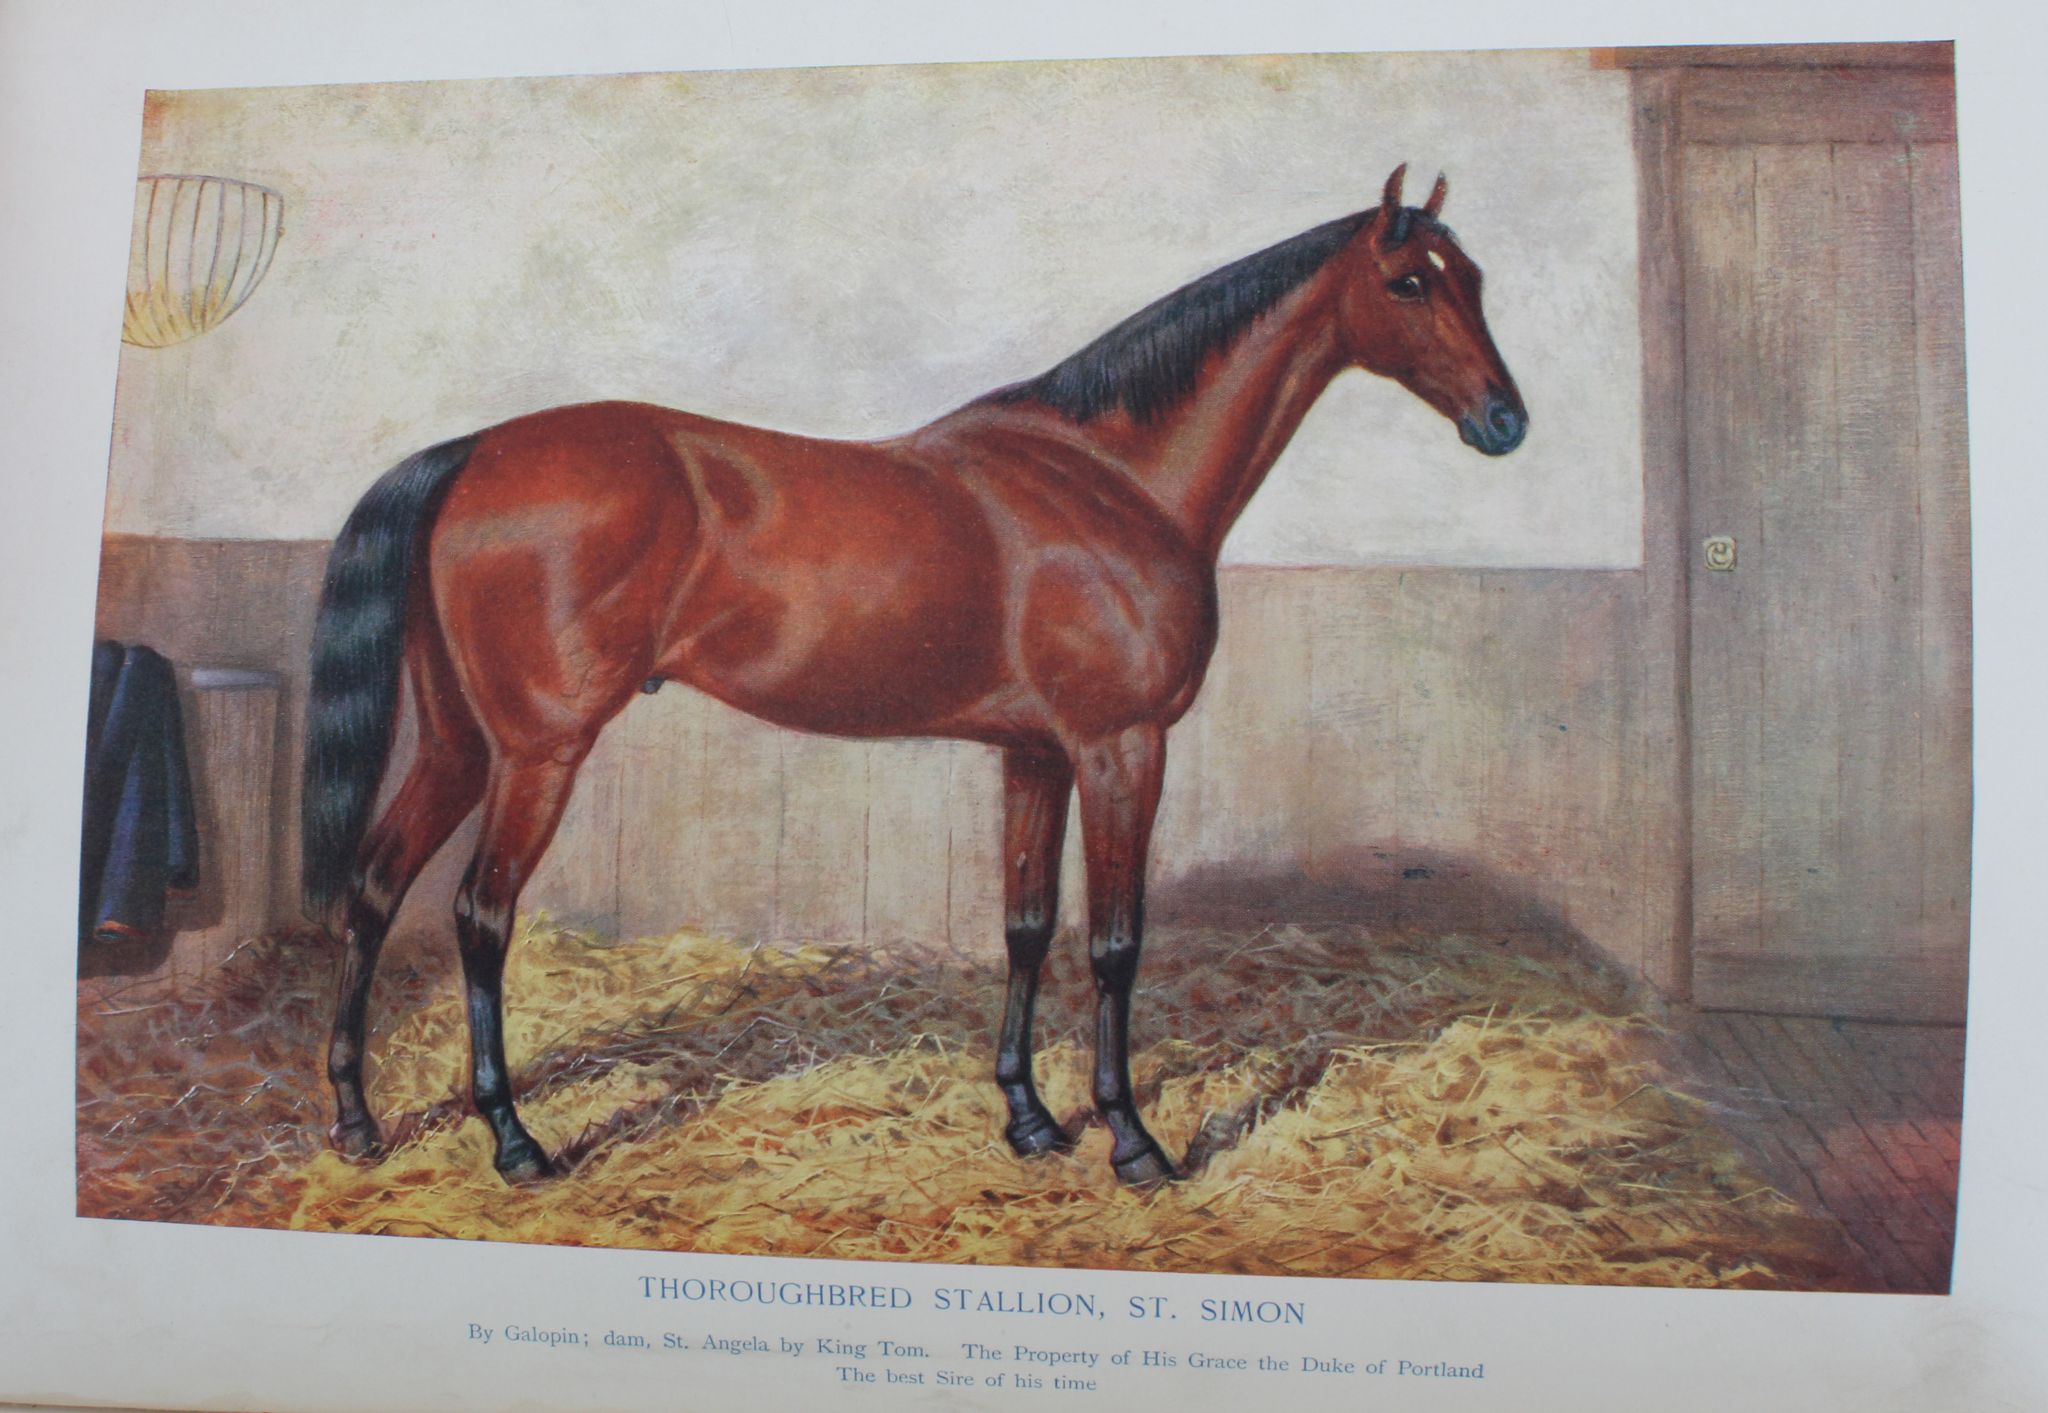 AXE, J. Wortley (editor).  The Horse. Its Treatment in Health and Disease. London: Gresham, 1905. - Image 2 of 2